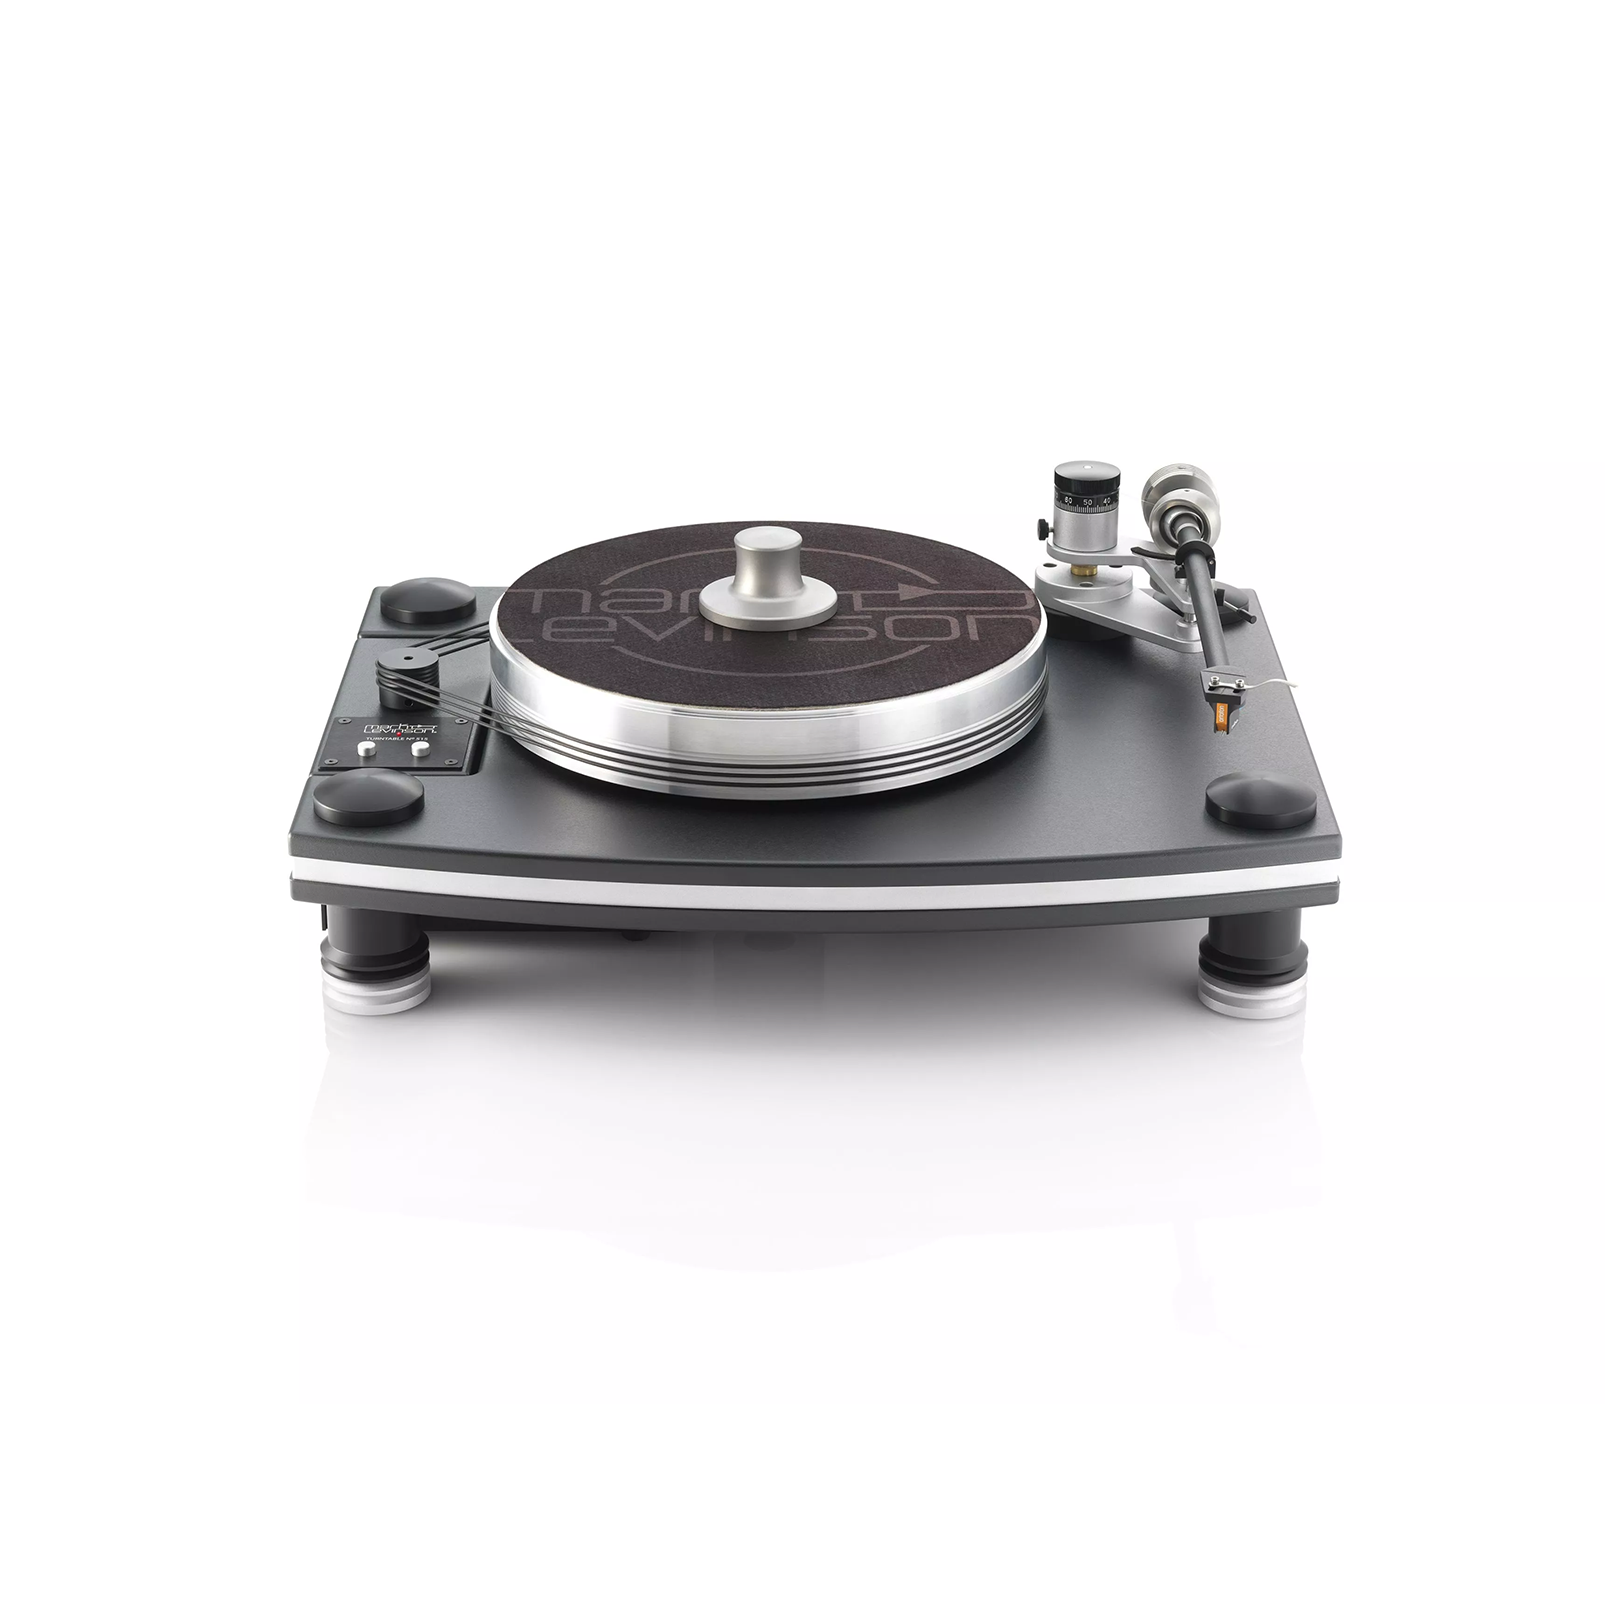 № 515 - Black - Turntable - Front